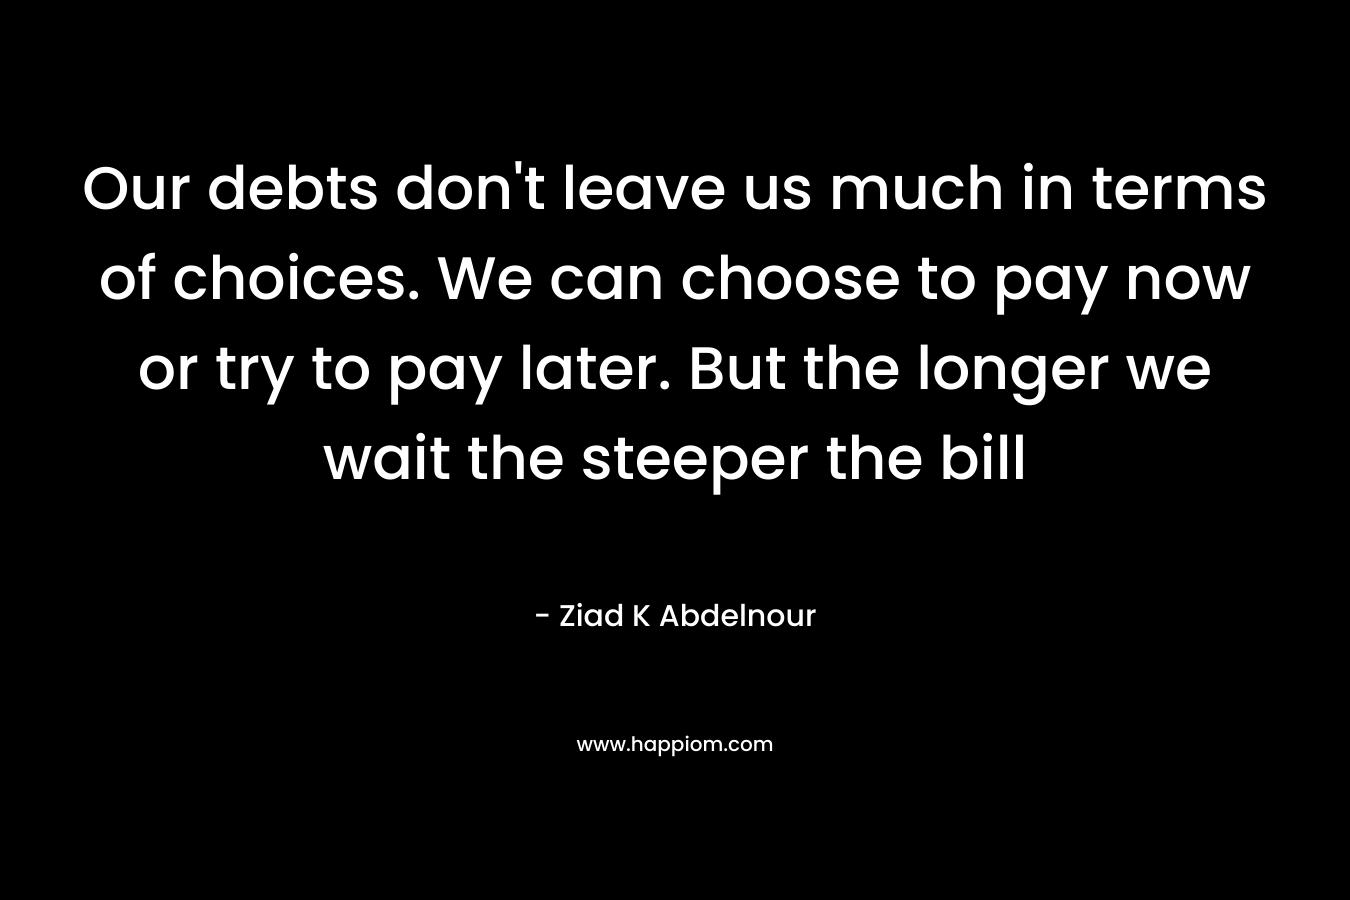 Our debts don't leave us much in terms of choices. We can choose to pay now or try to pay later. But the longer we wait the steeper the bill